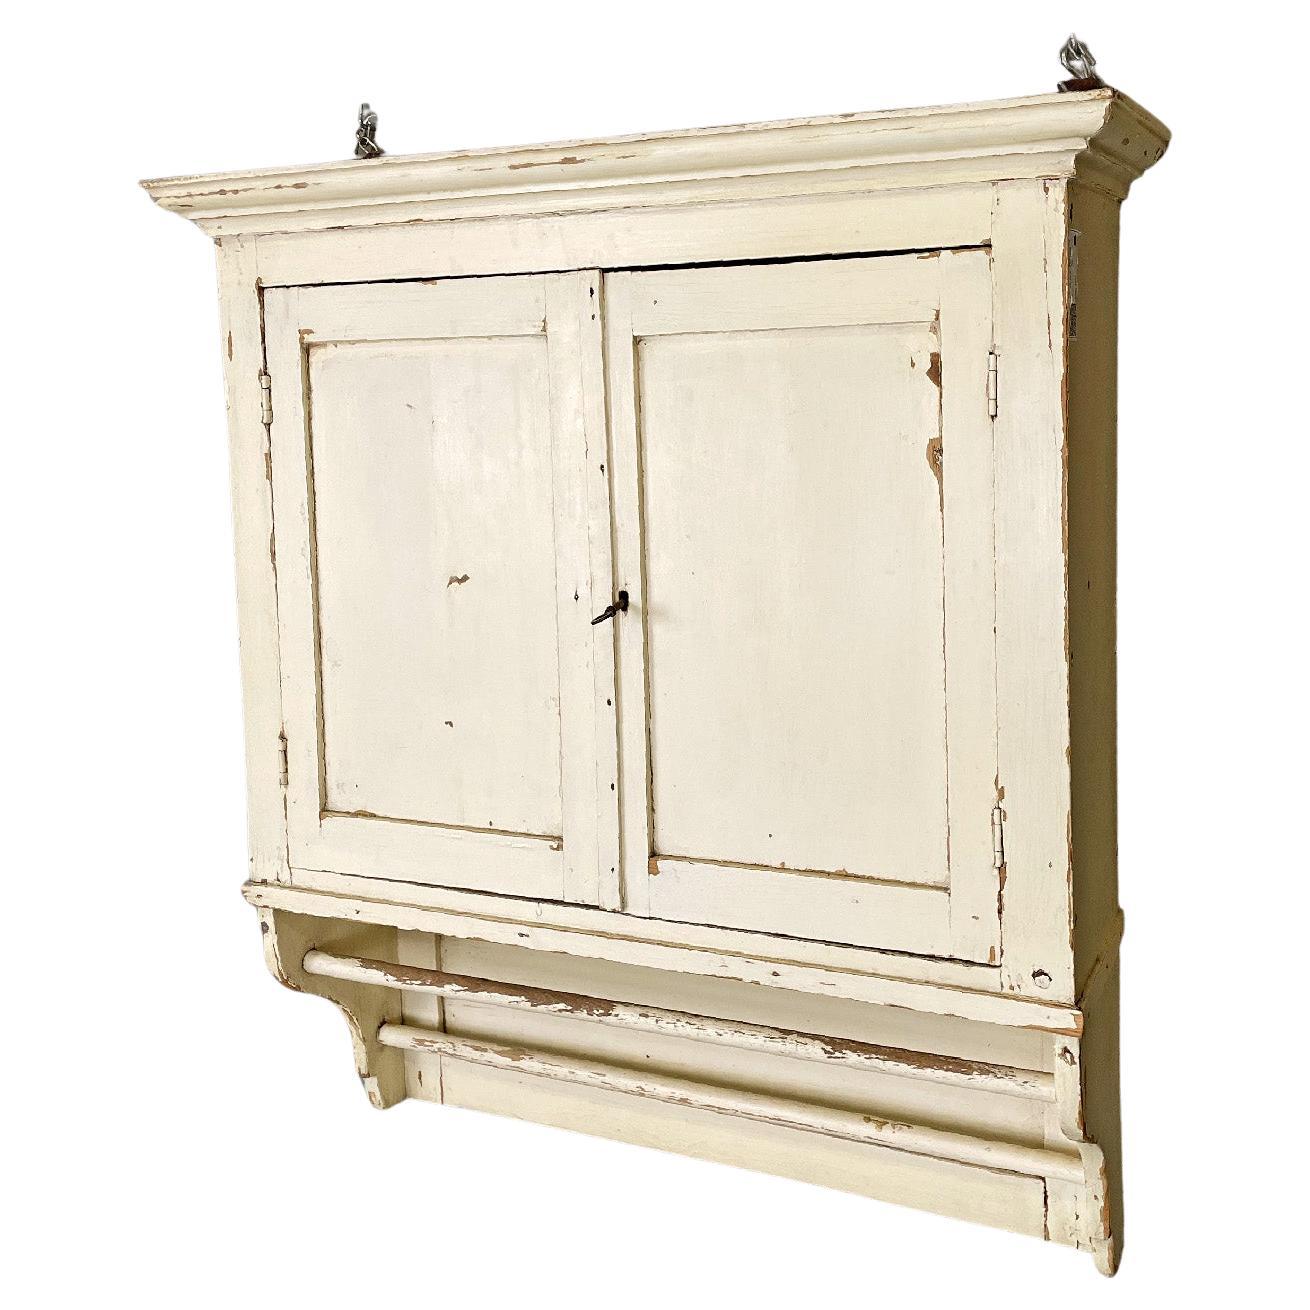 Italian antique white wooden kitchen wall cabinet, early 1900s